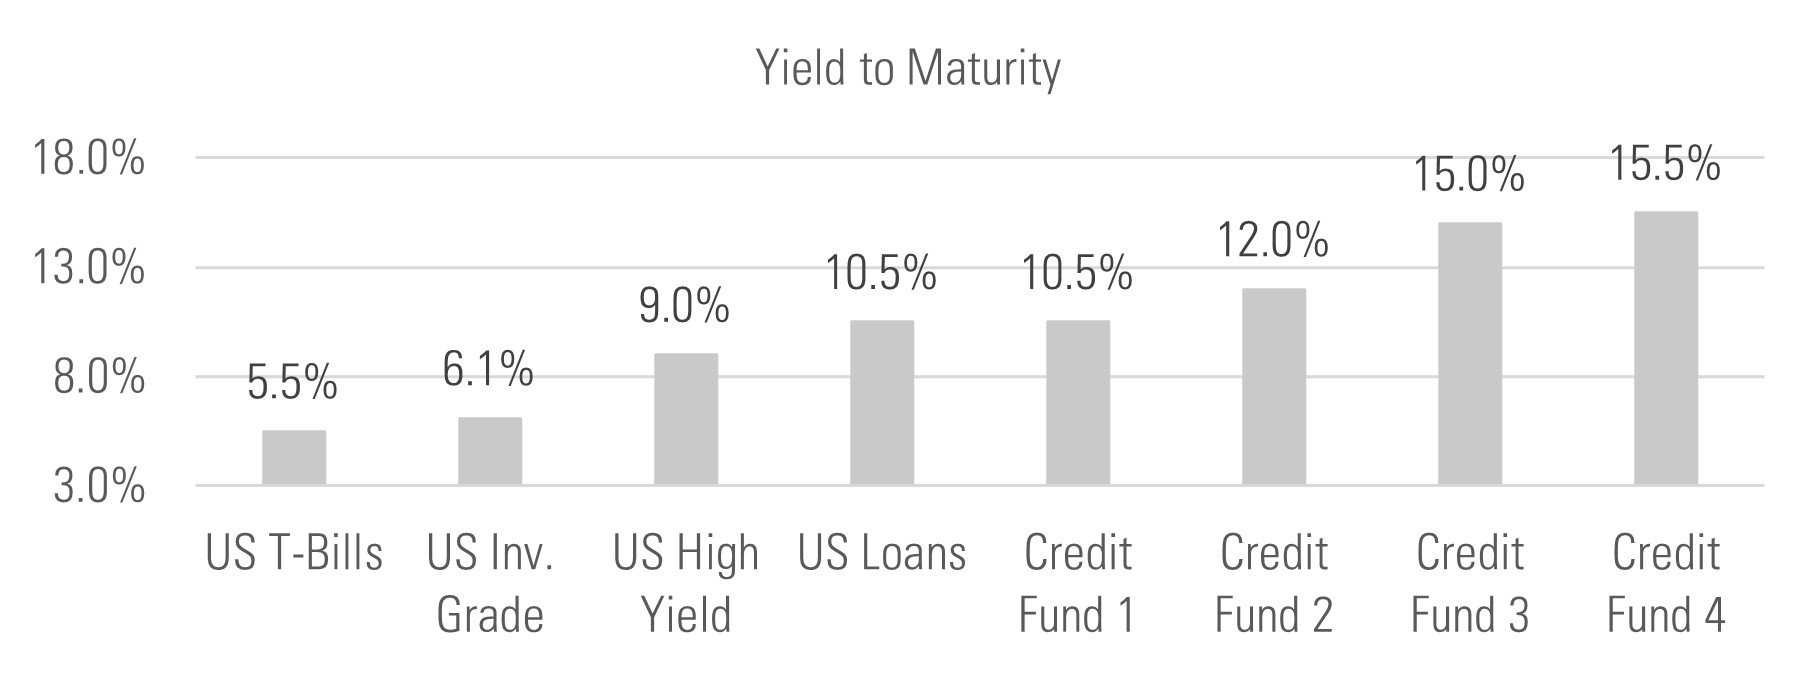 Yield to Maturity graphic